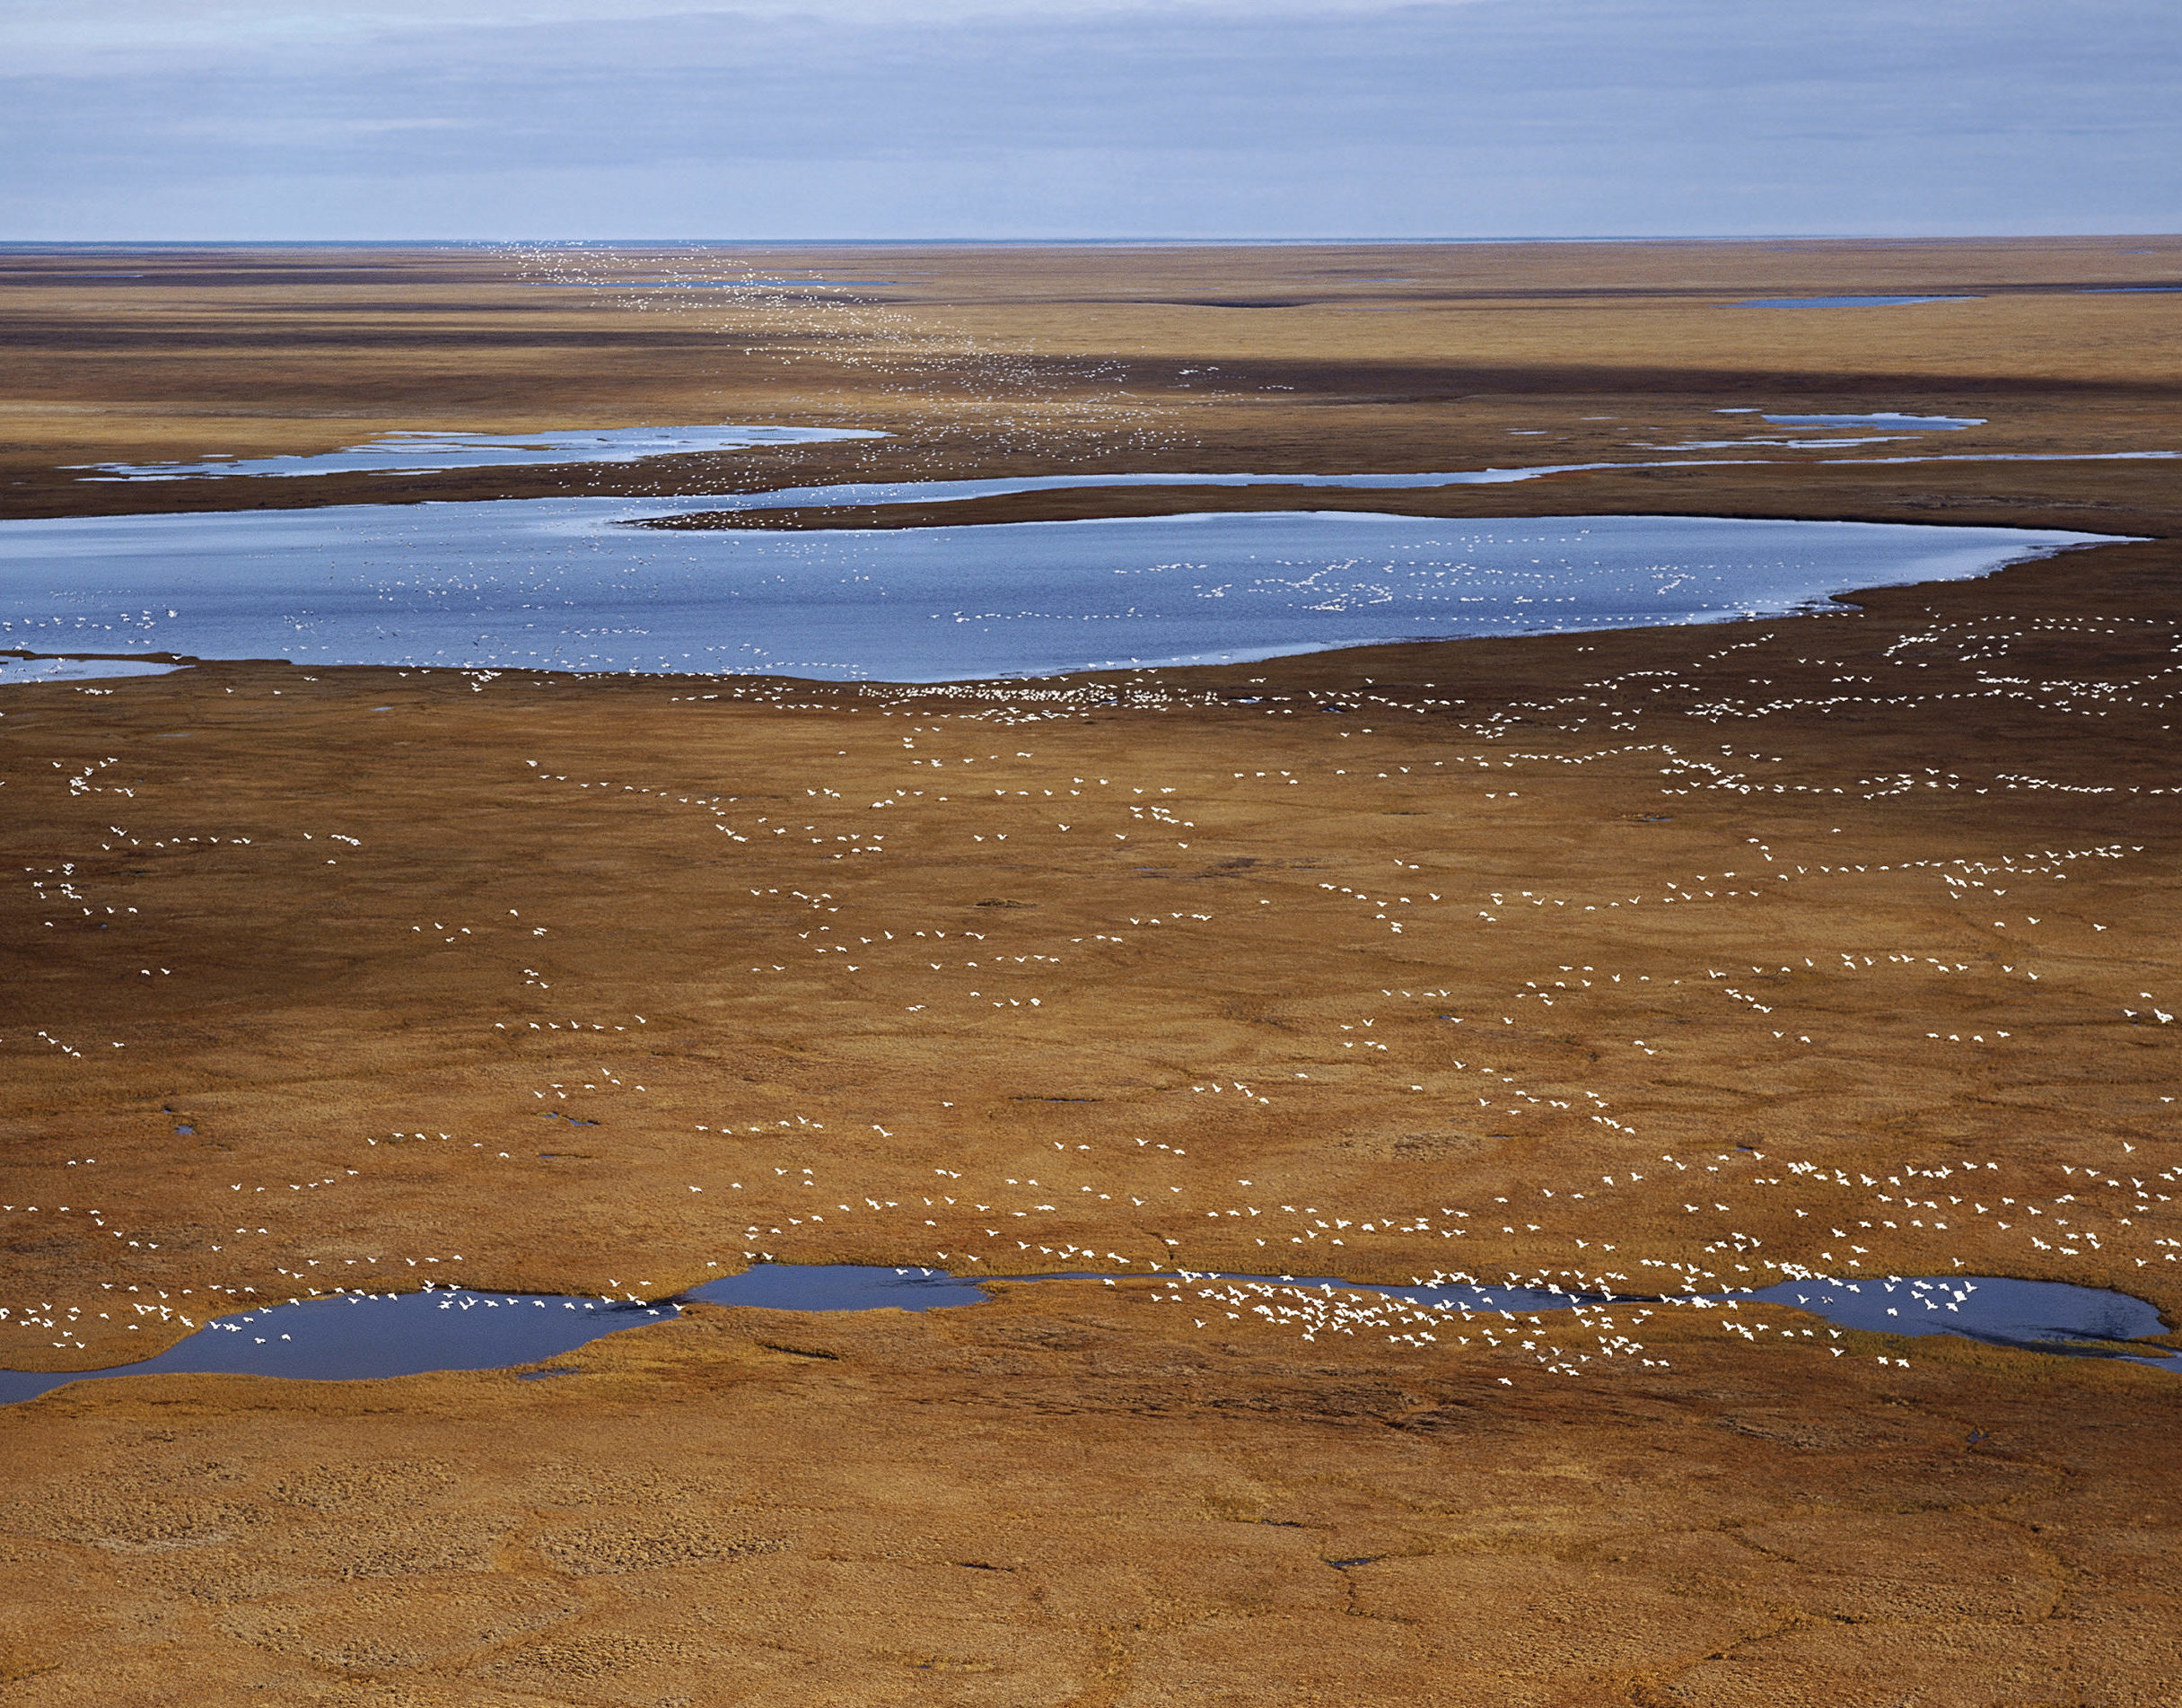 Fig_21.05_summer aerial image of snow geese over amber tundra and deep blue water